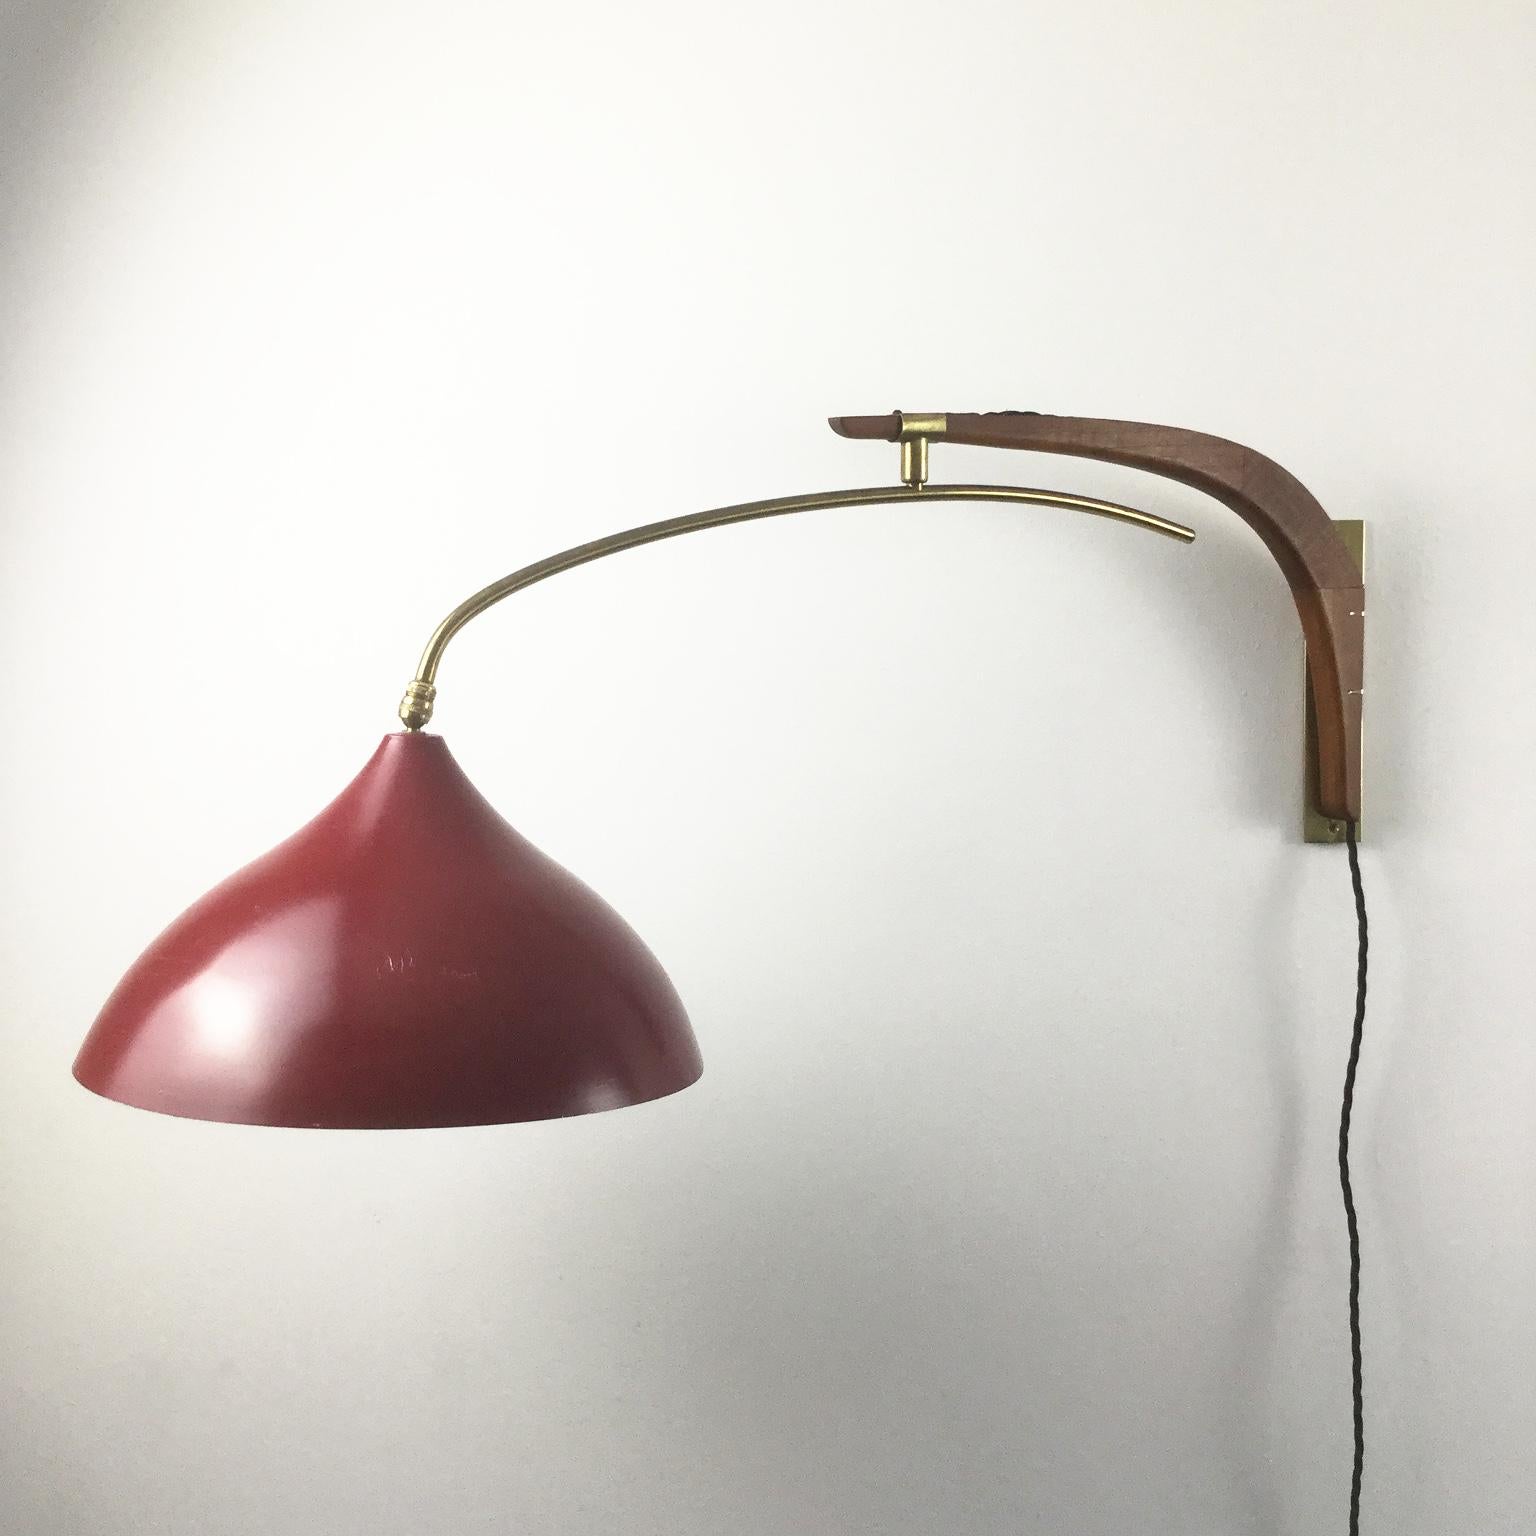 An orientable wall lamp by Svend Aage Holm Sorensen (1913-2004) in teak, brass, red and white lacquered metal edited by Holm Sorensen.